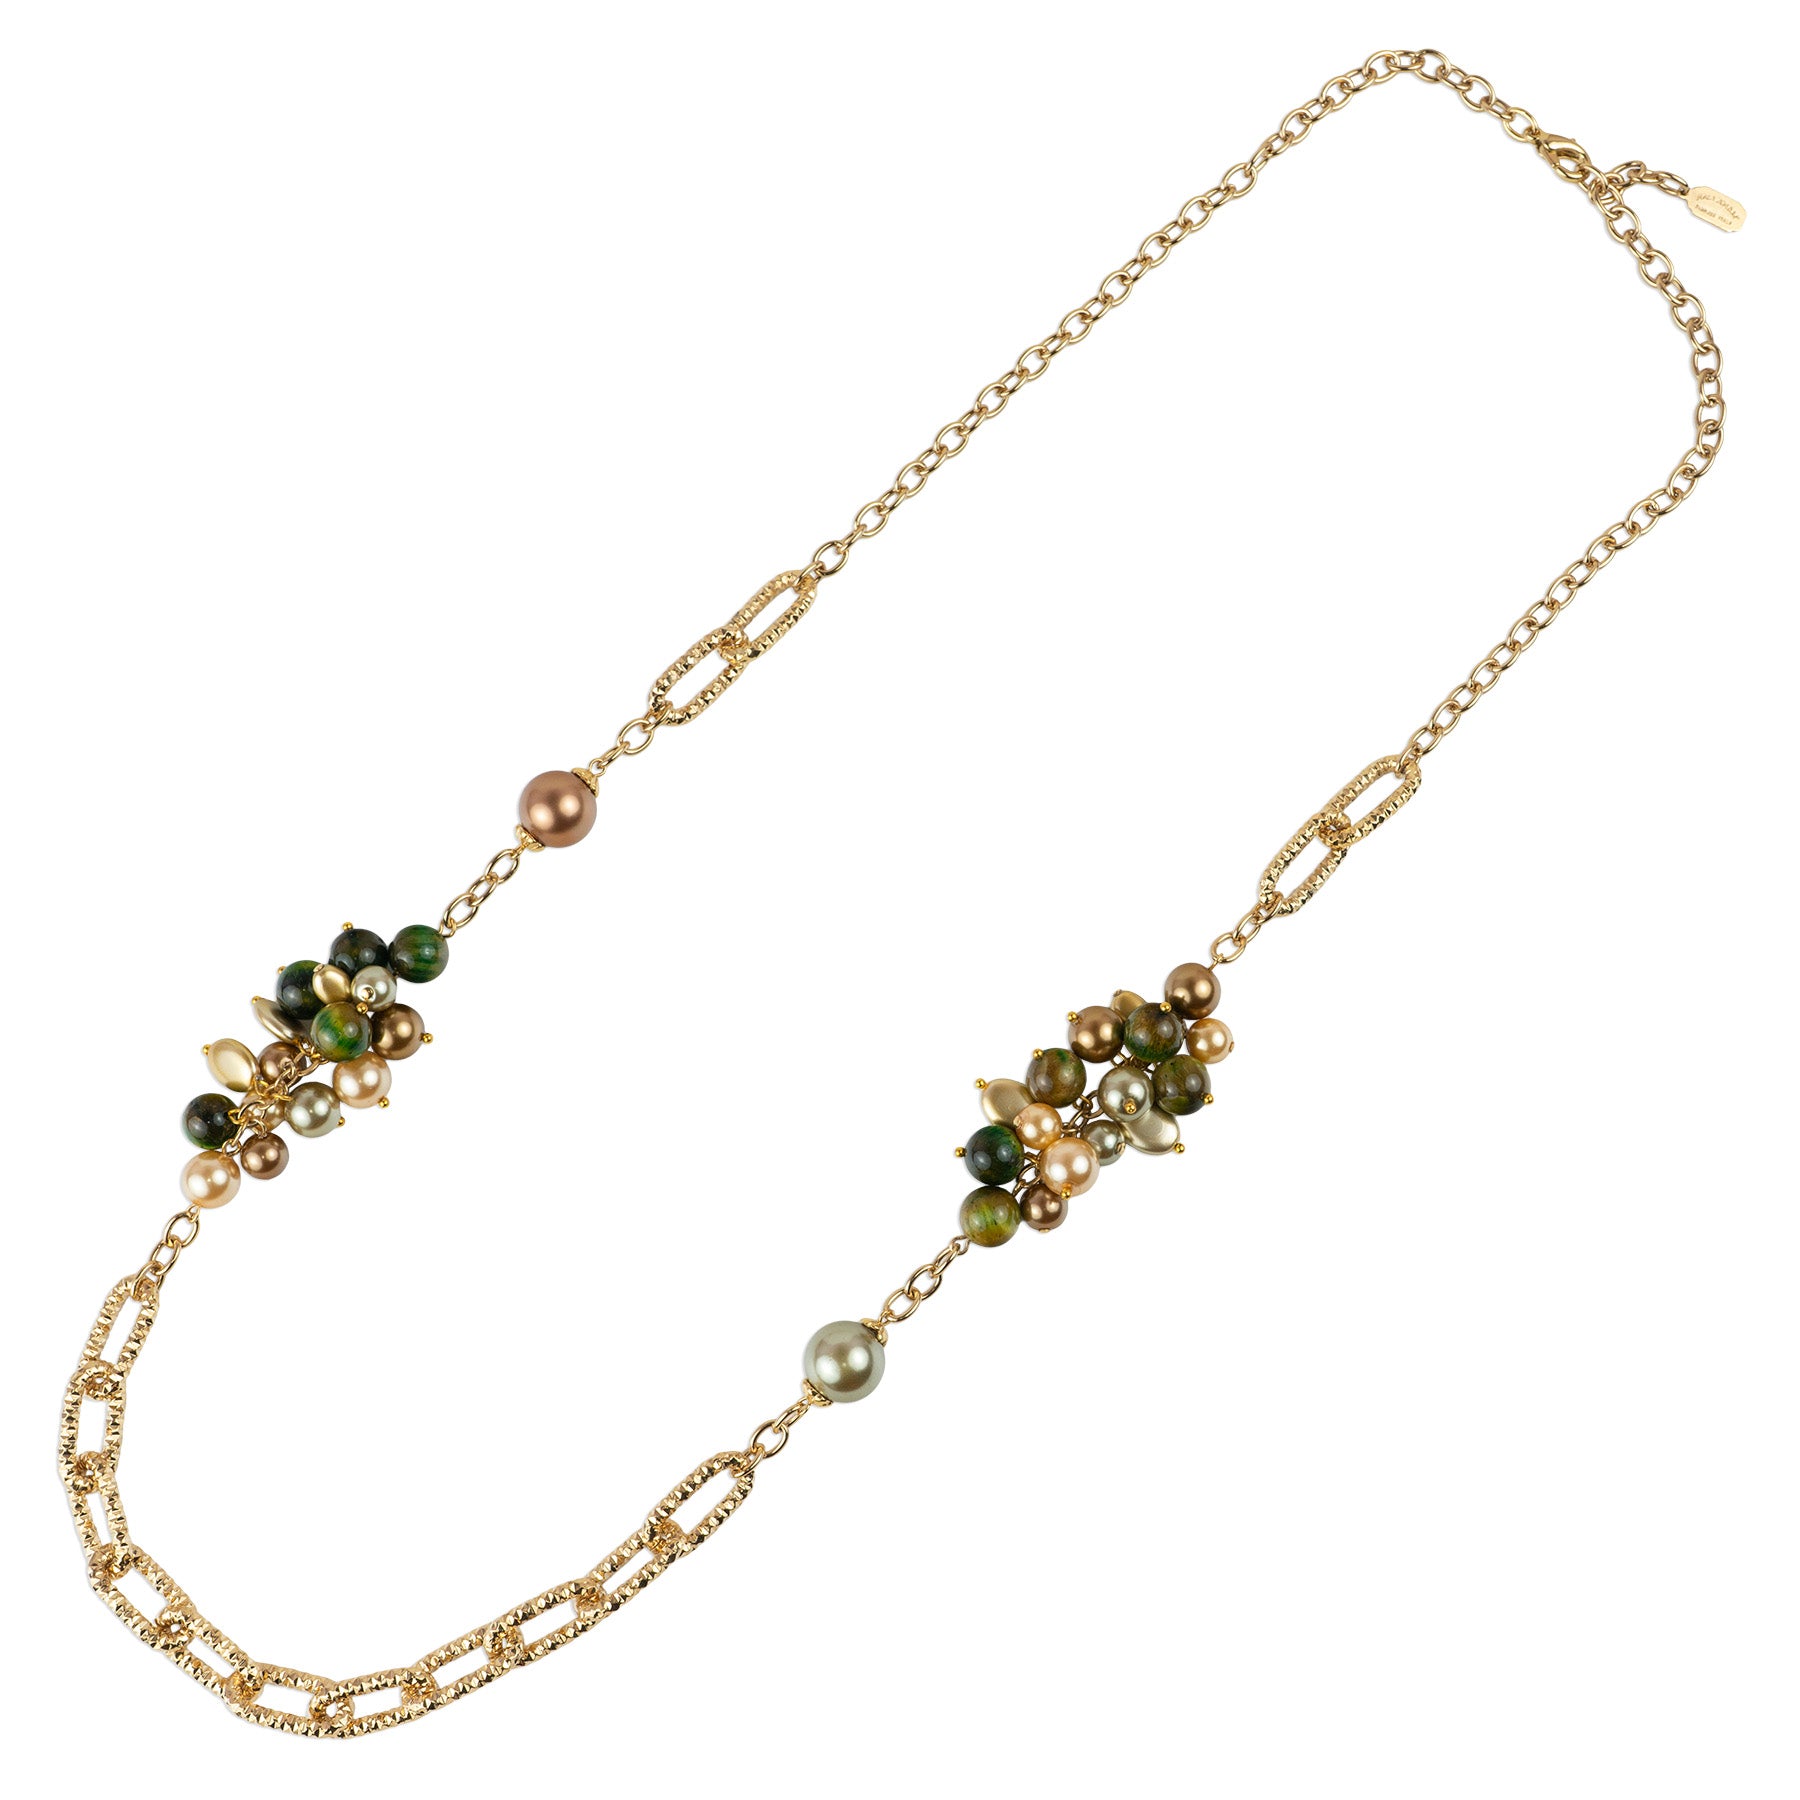 Long chain necklace with a cluster of semi-precious stones and pearls